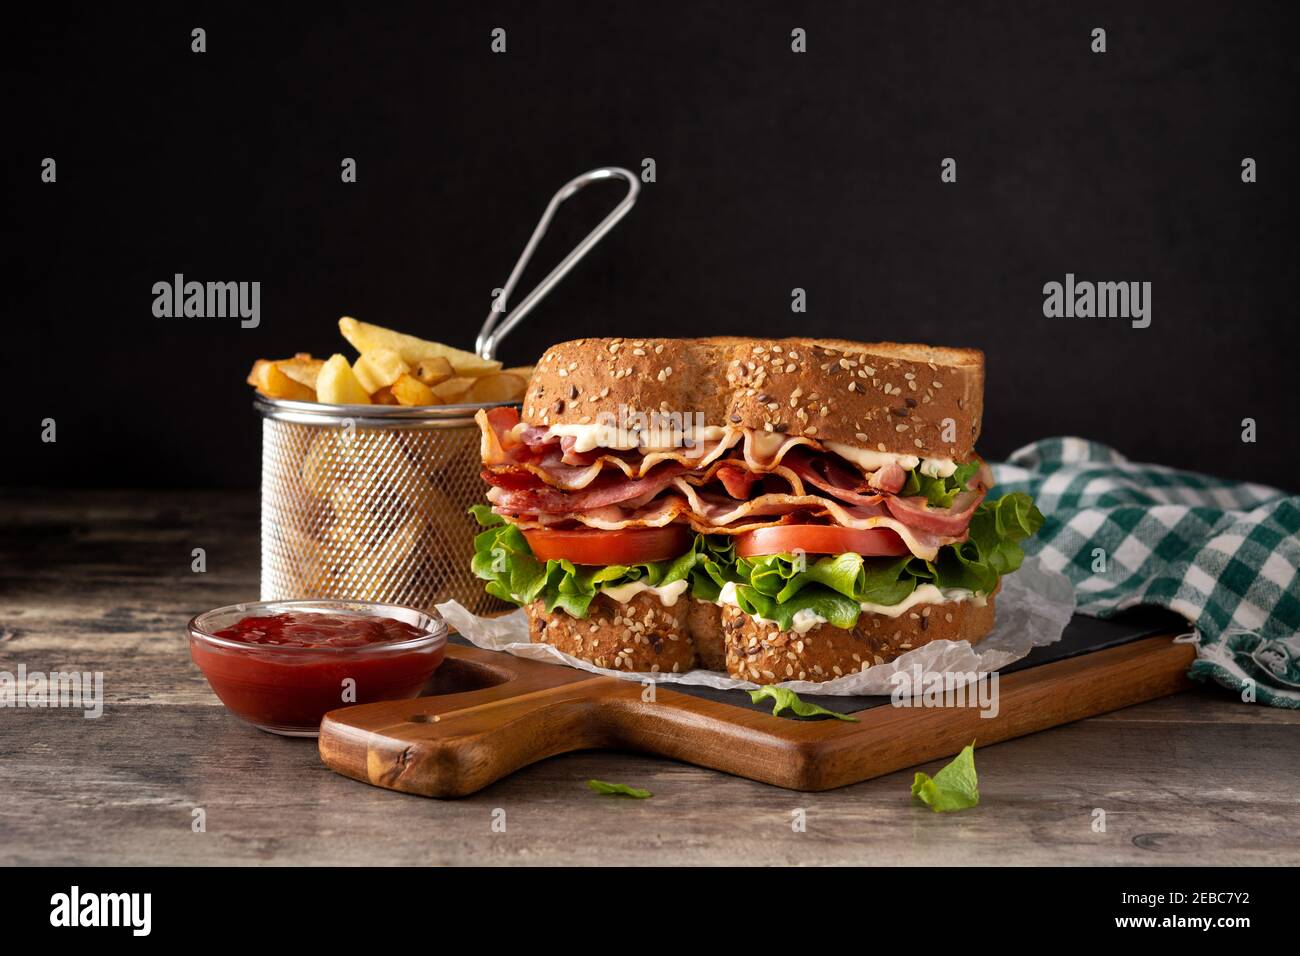 BLT sandwich and fries on wooden table Stock Photo